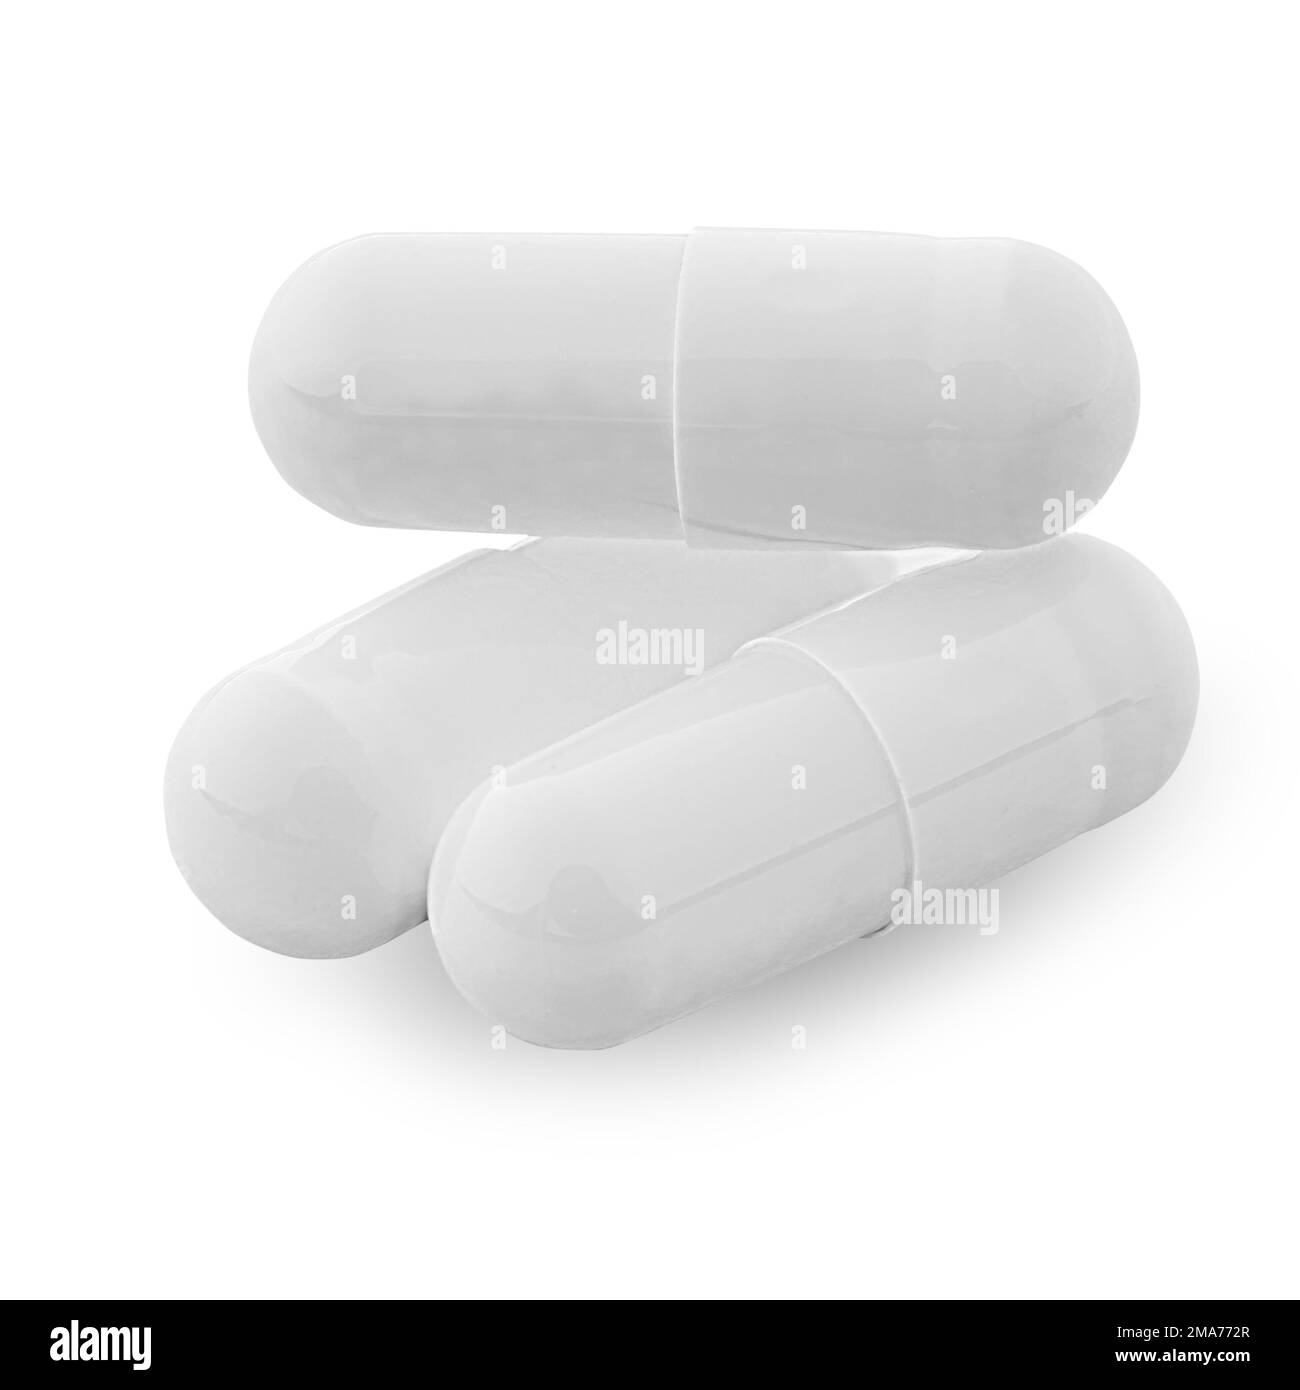 Gel capsule. White medicine capsule on white background. food supplement, pharmacy concept. Stock Photo